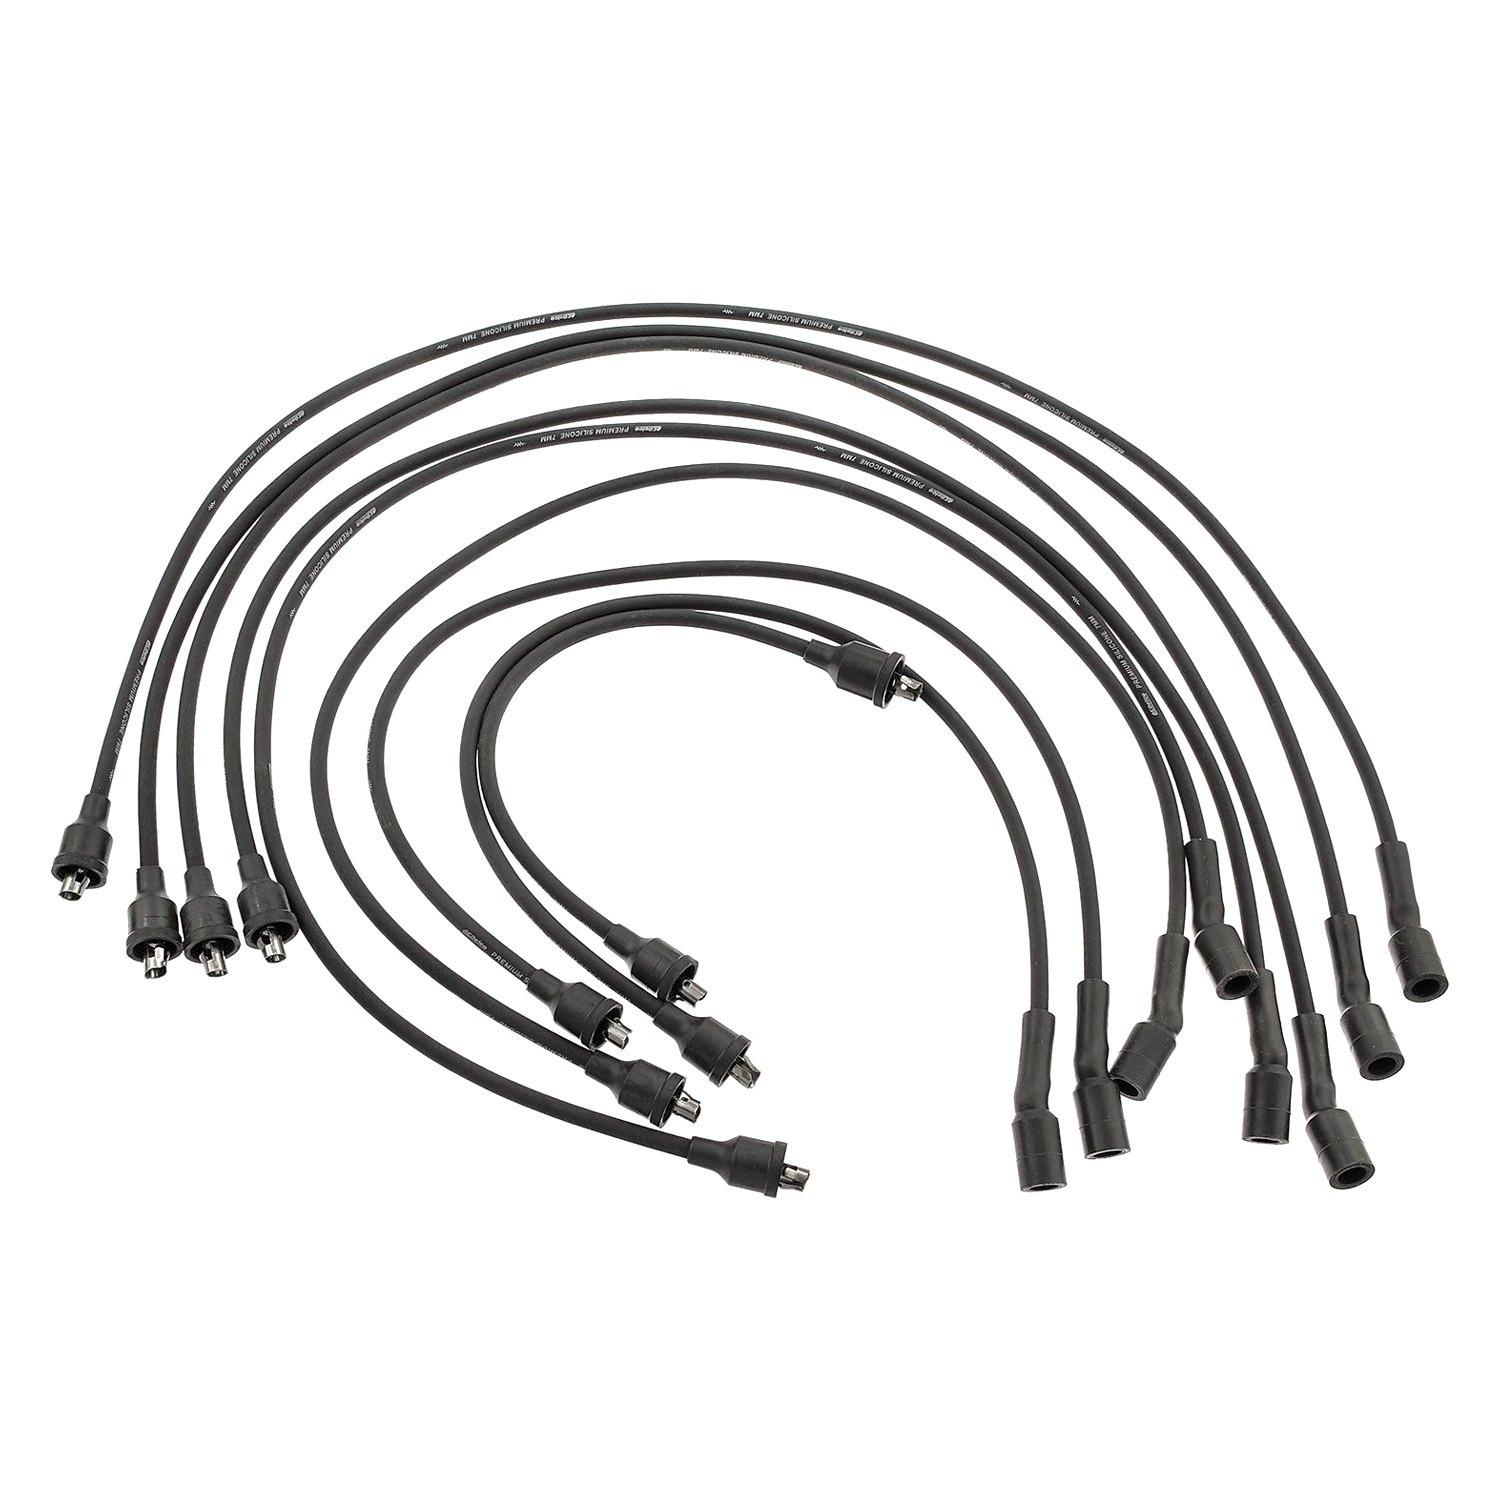 ACDelco 9508N Professional Spark Plug Wire Set